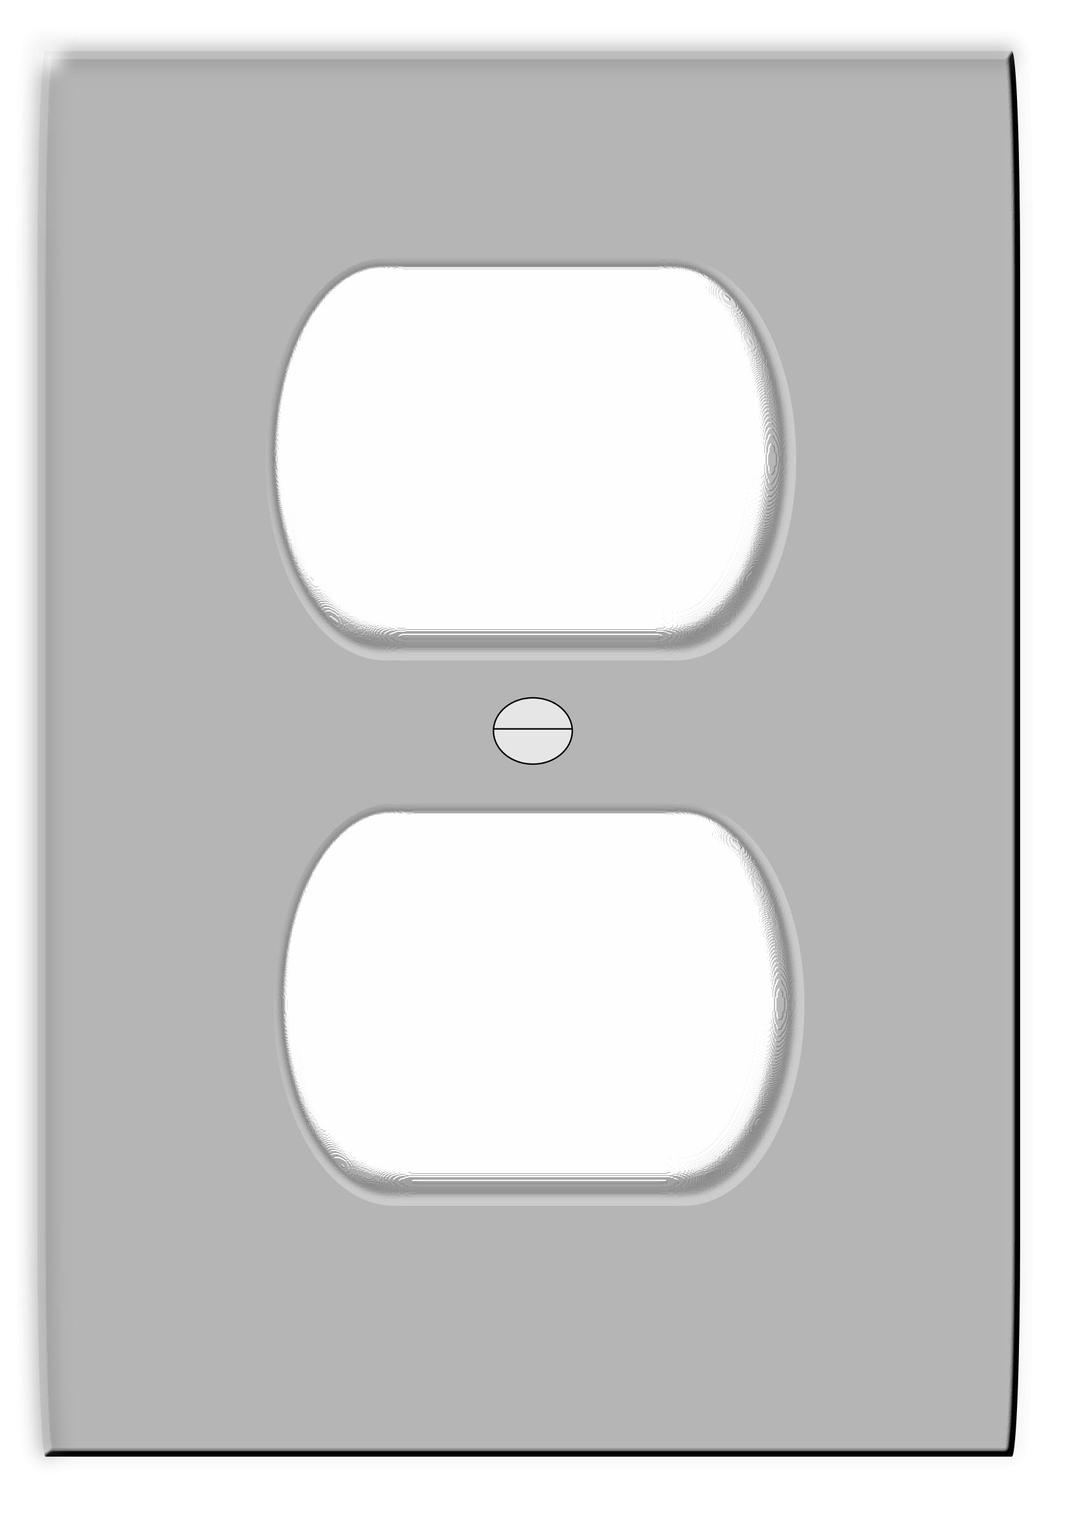 Receptacle Cover png transparent